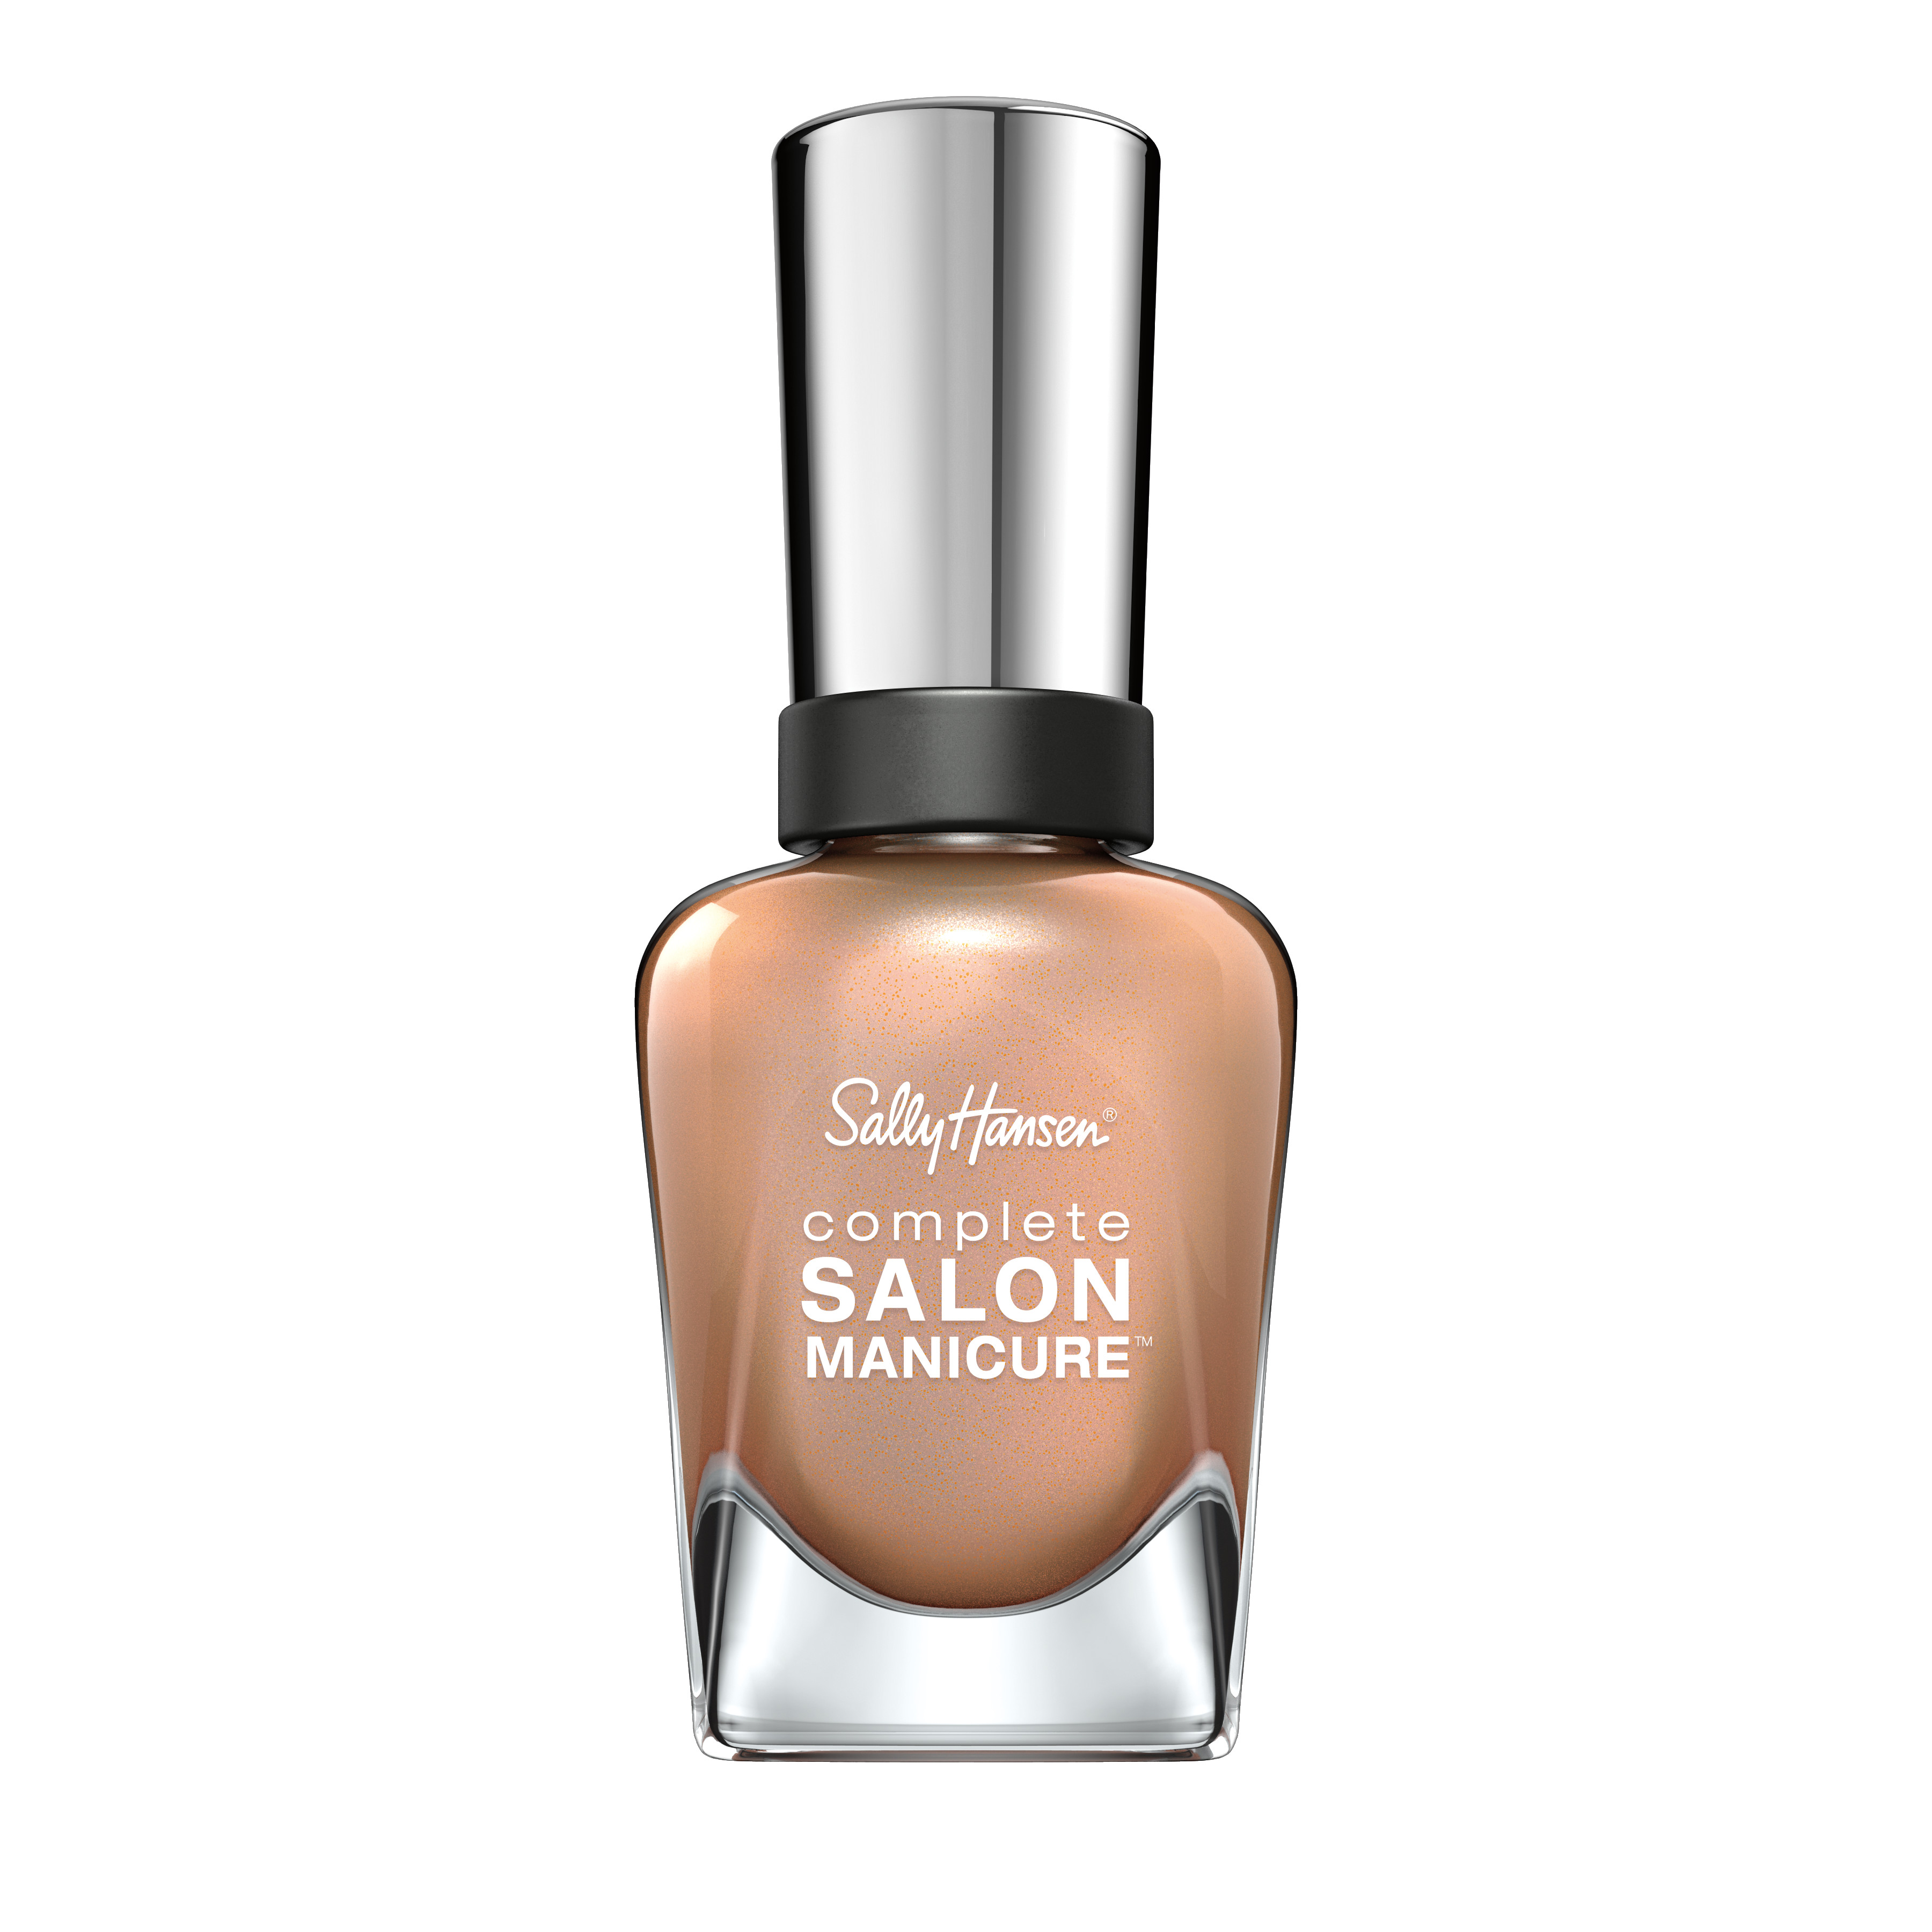 Sally Hansen Complete Salon Manicure Nail Color, You Glow, Girl! - image 1 of 2